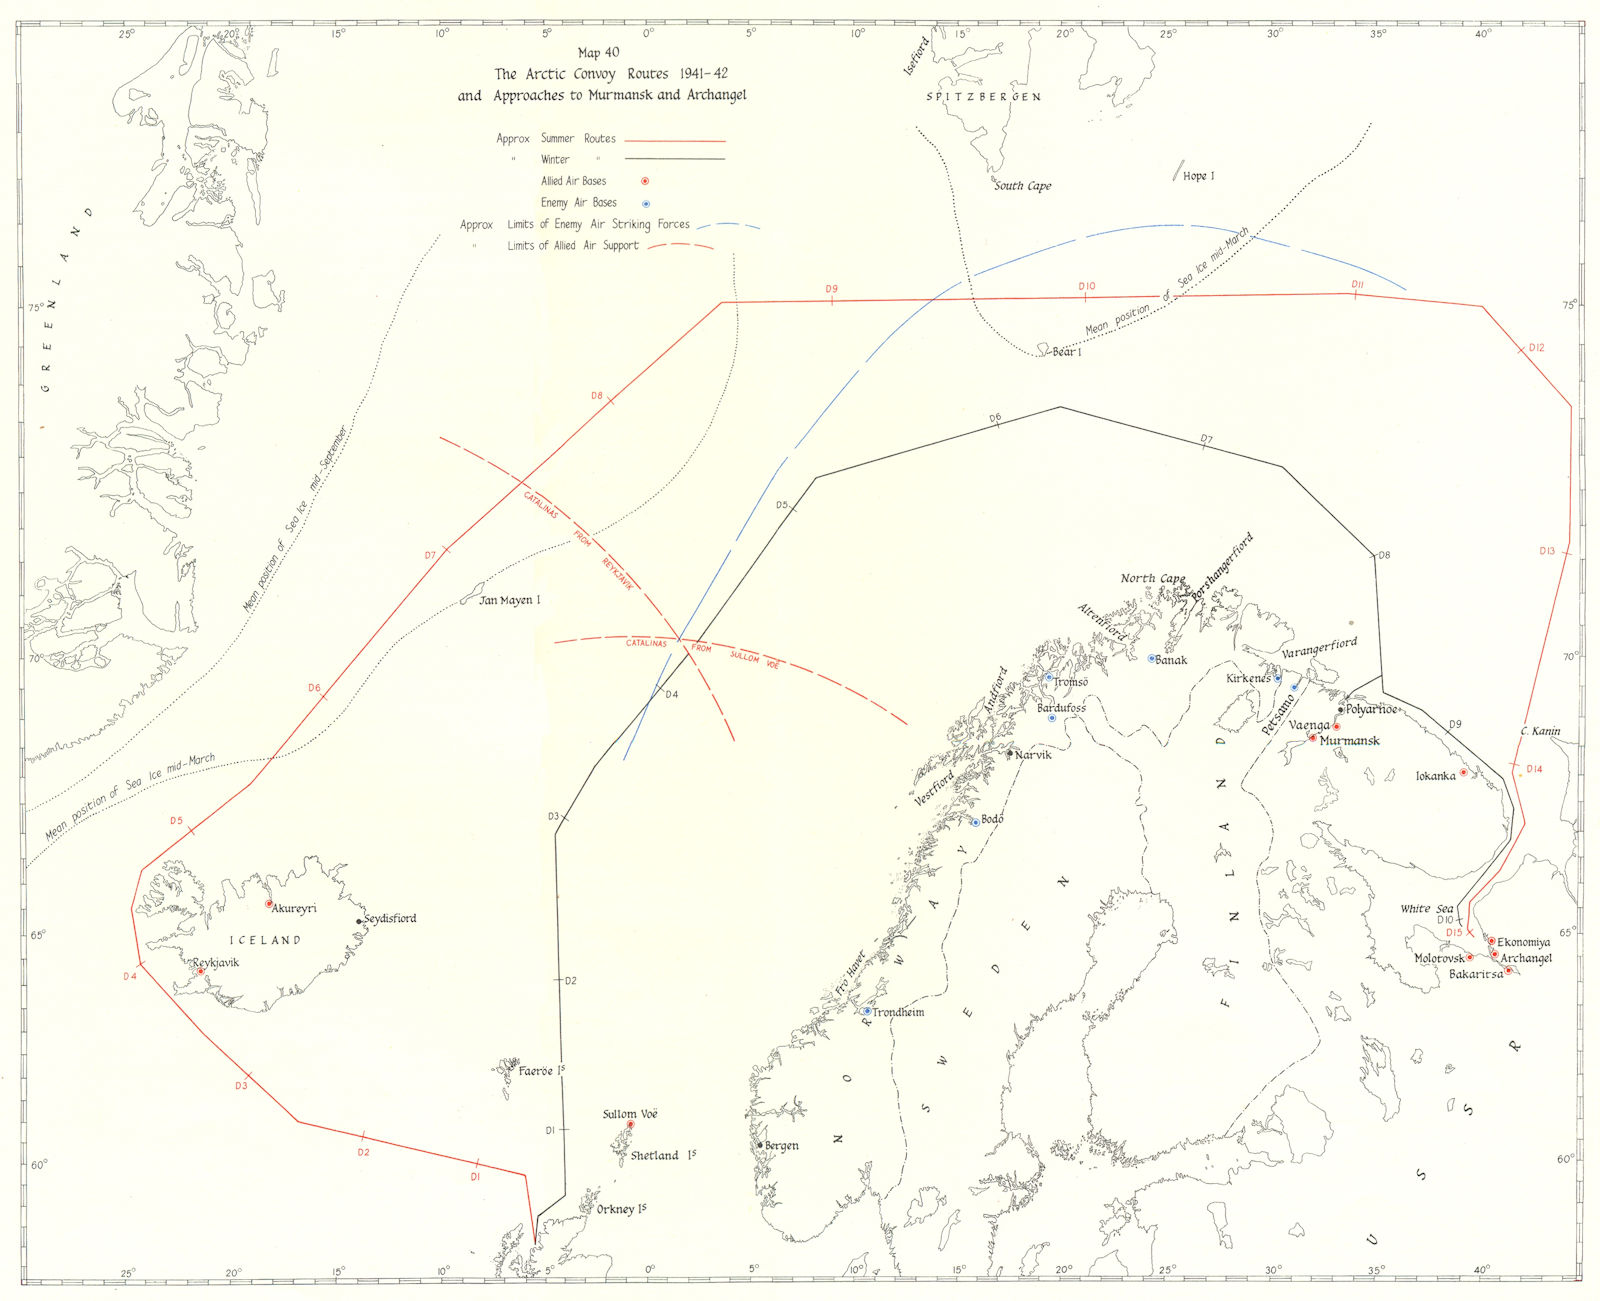 ARCTIC CONVOY ROUTES. 1941-42 & Approaches to Murmansk & Archangel 1954 map